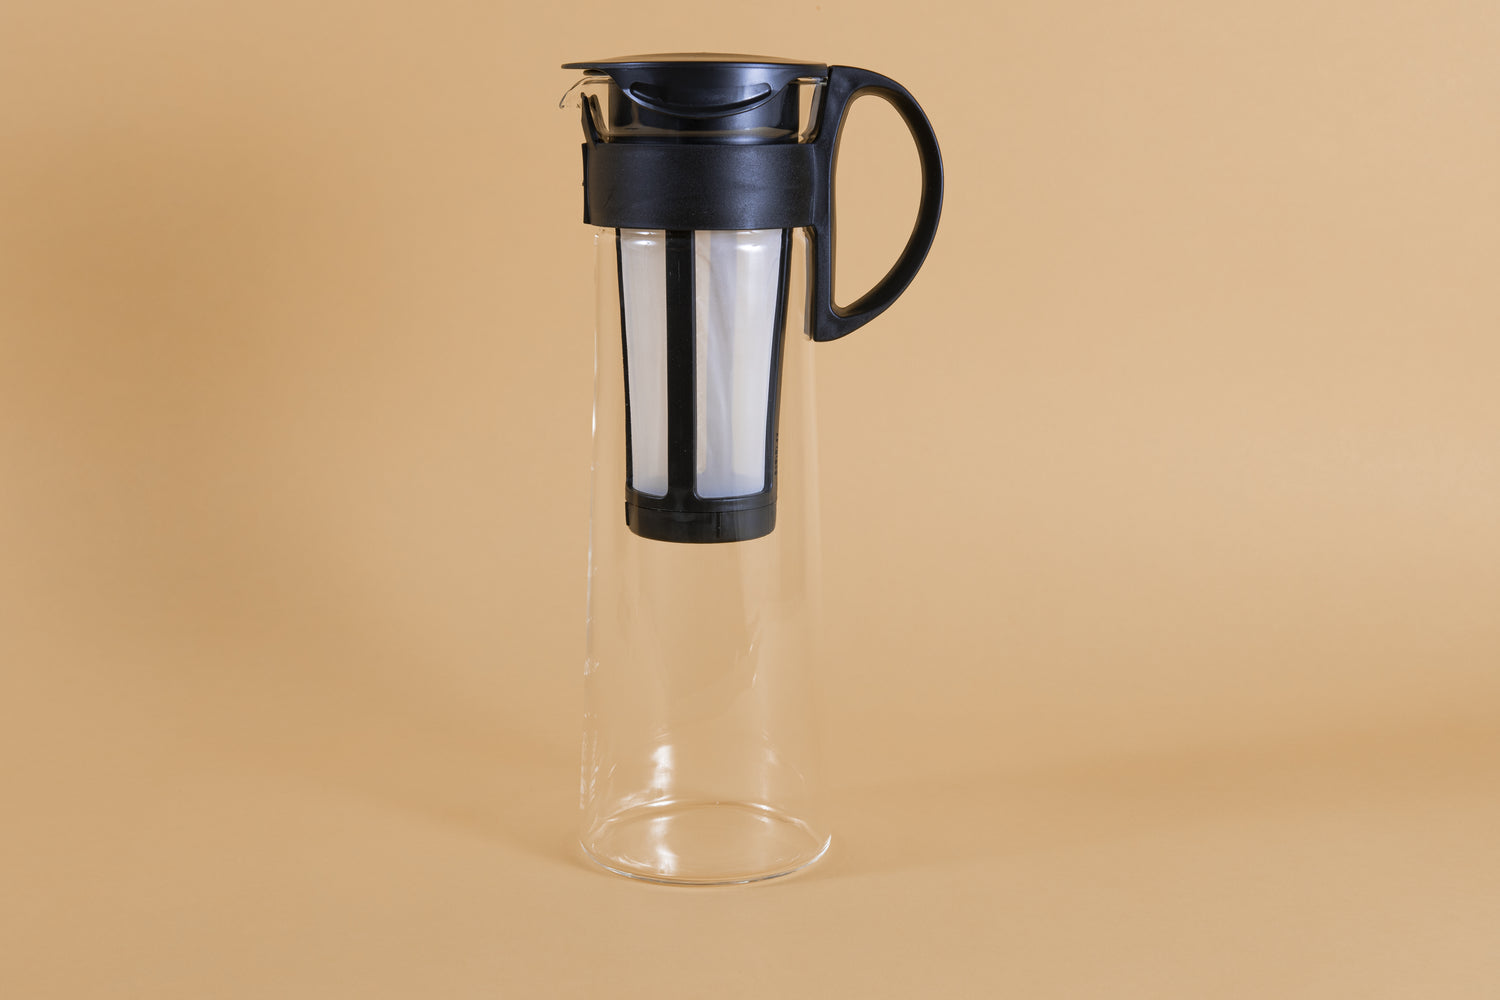 Tall glass server with white nylon mesh coffee filter insert and black plastic handle and lid.